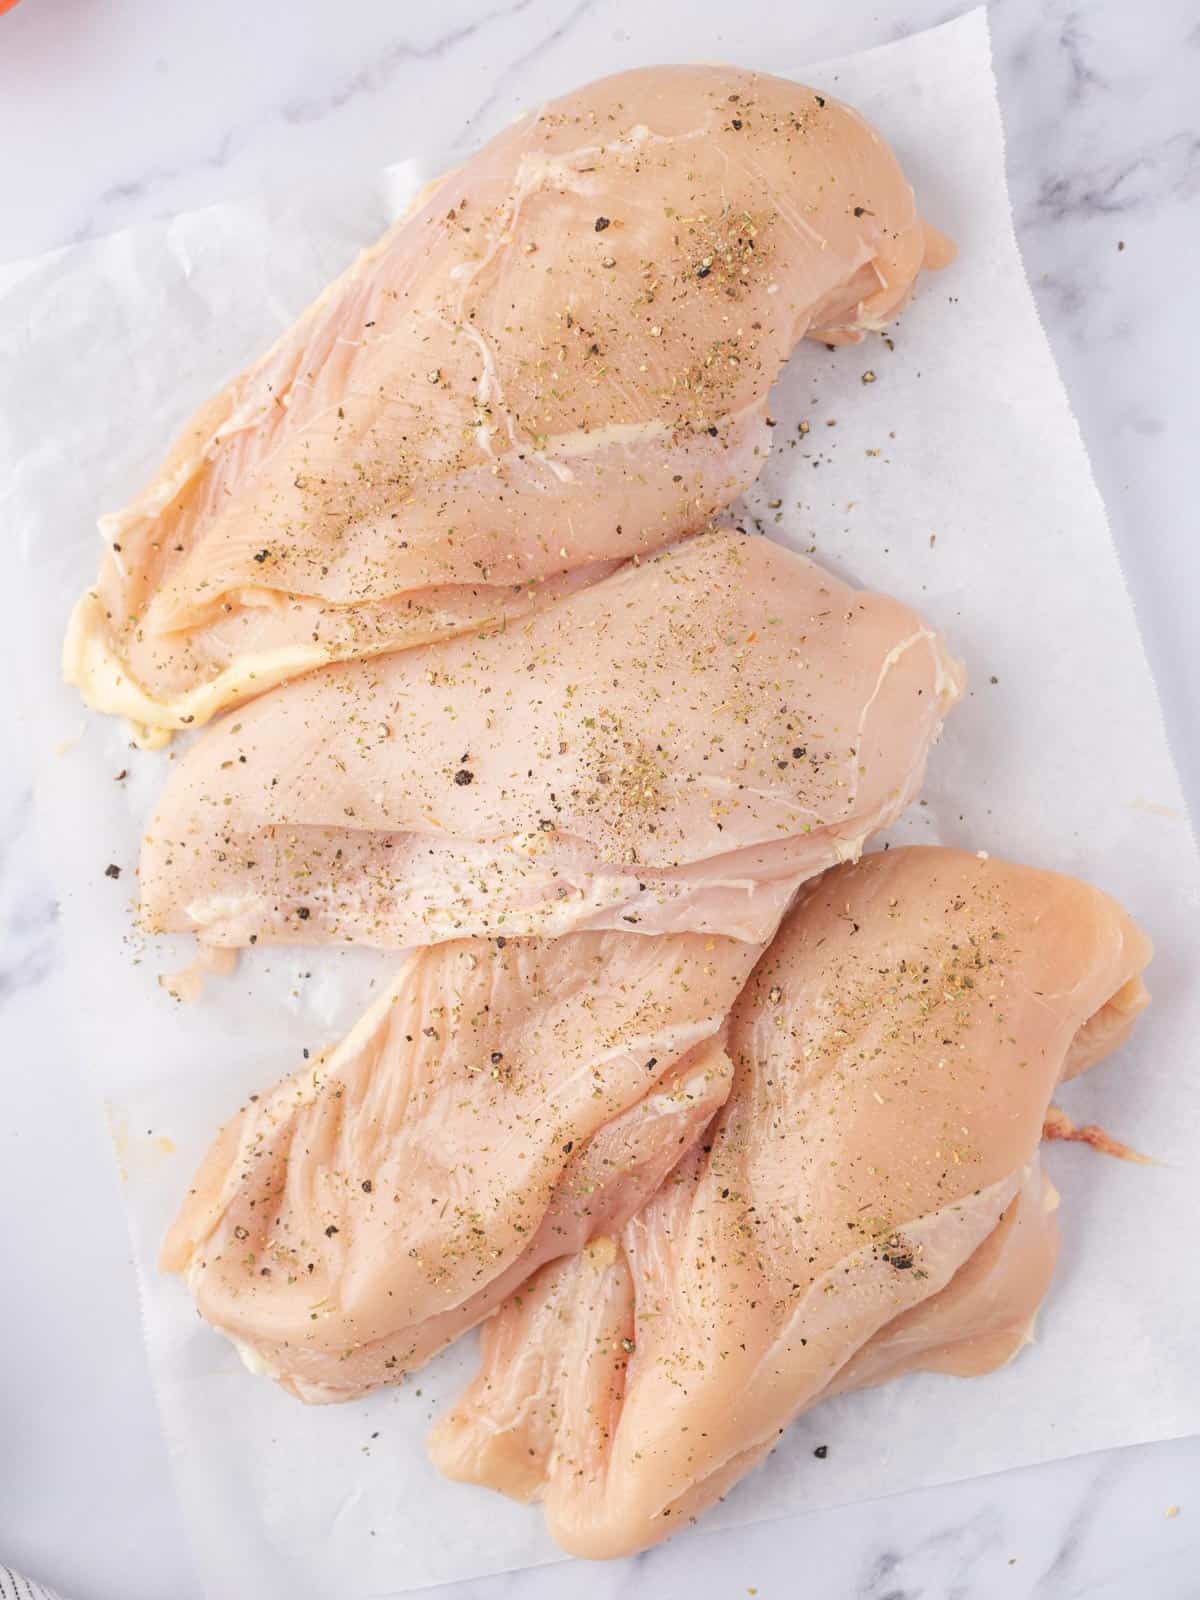 Chicken breast seasoned with salt and pepper.